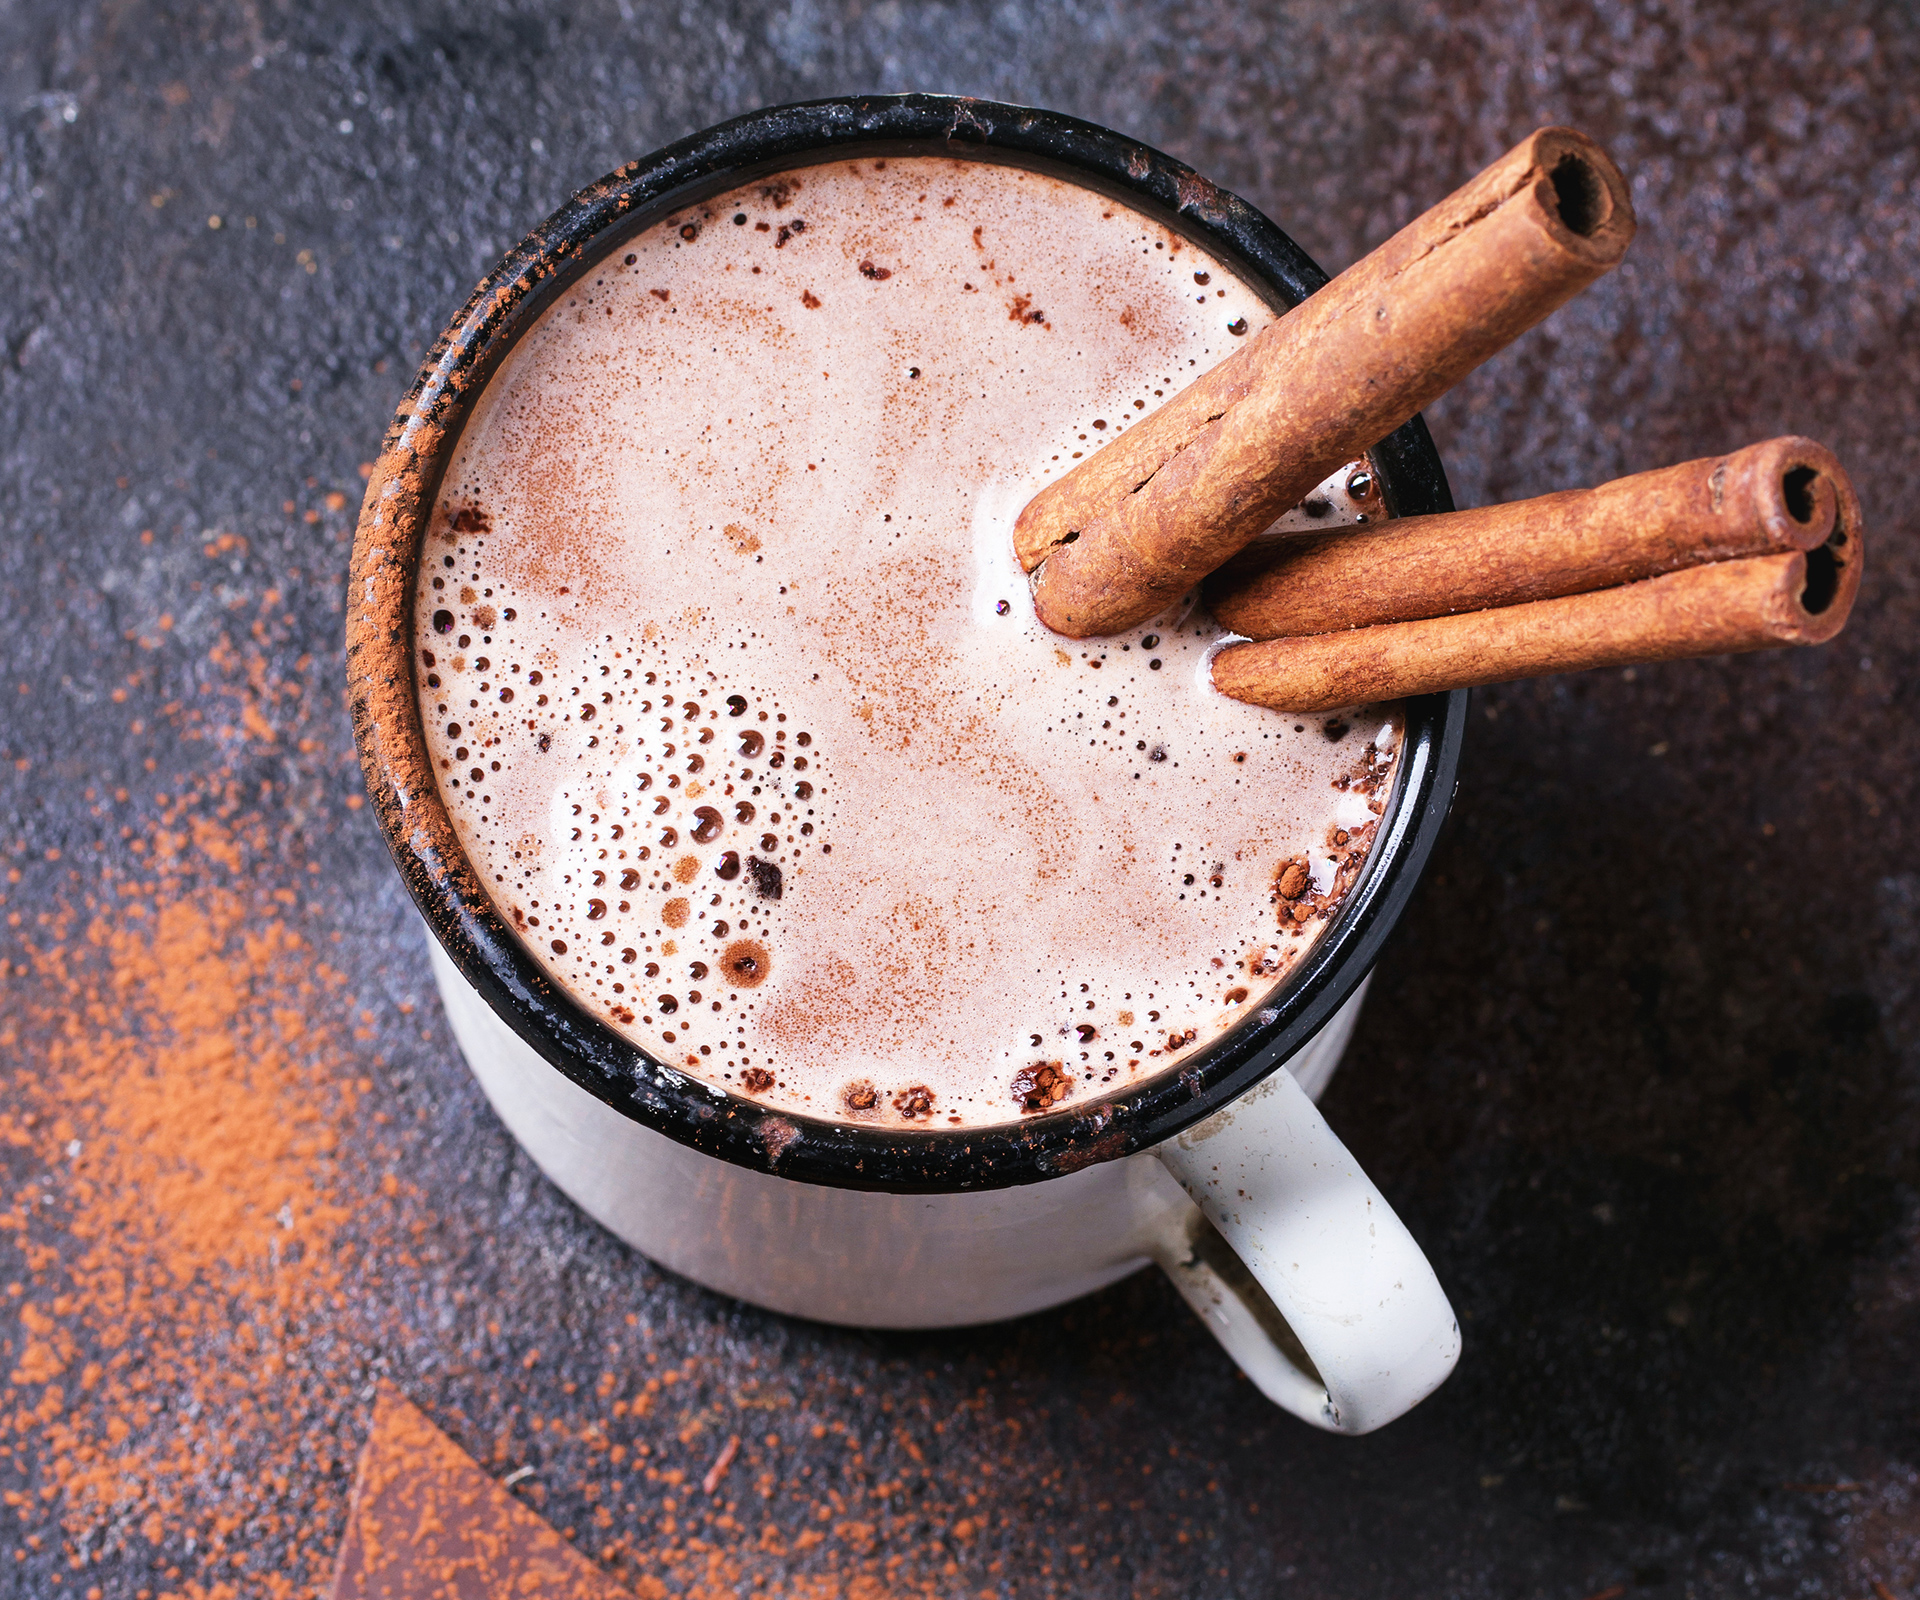 You guys, red wine hot chocolate is totally becoming a thing